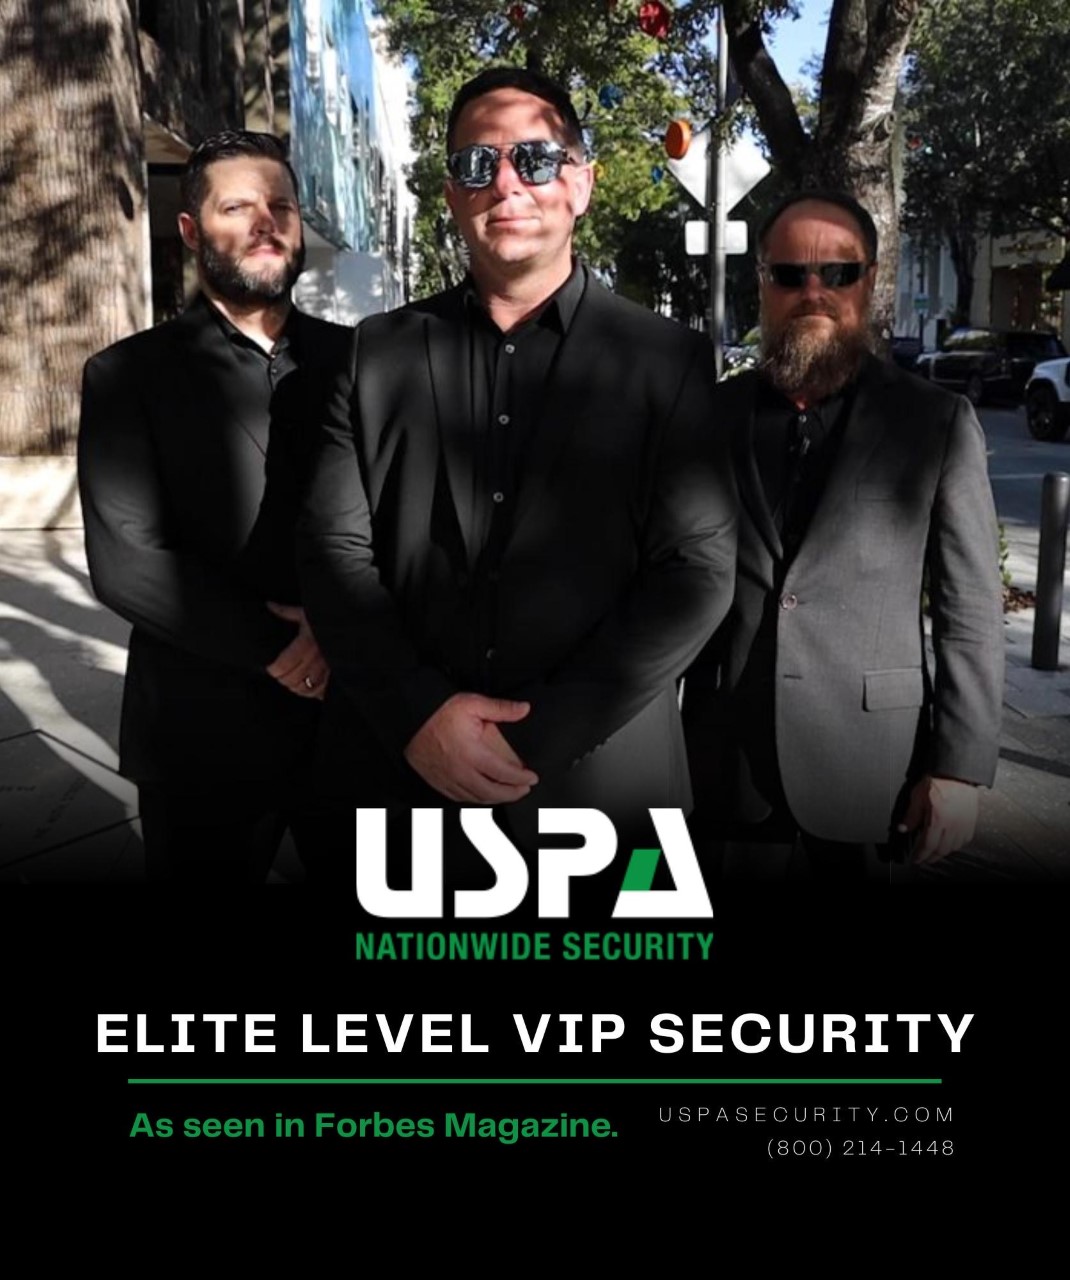 USPA's Southampton Event Security Service Division is ready ahead of Memorial Day Weekend